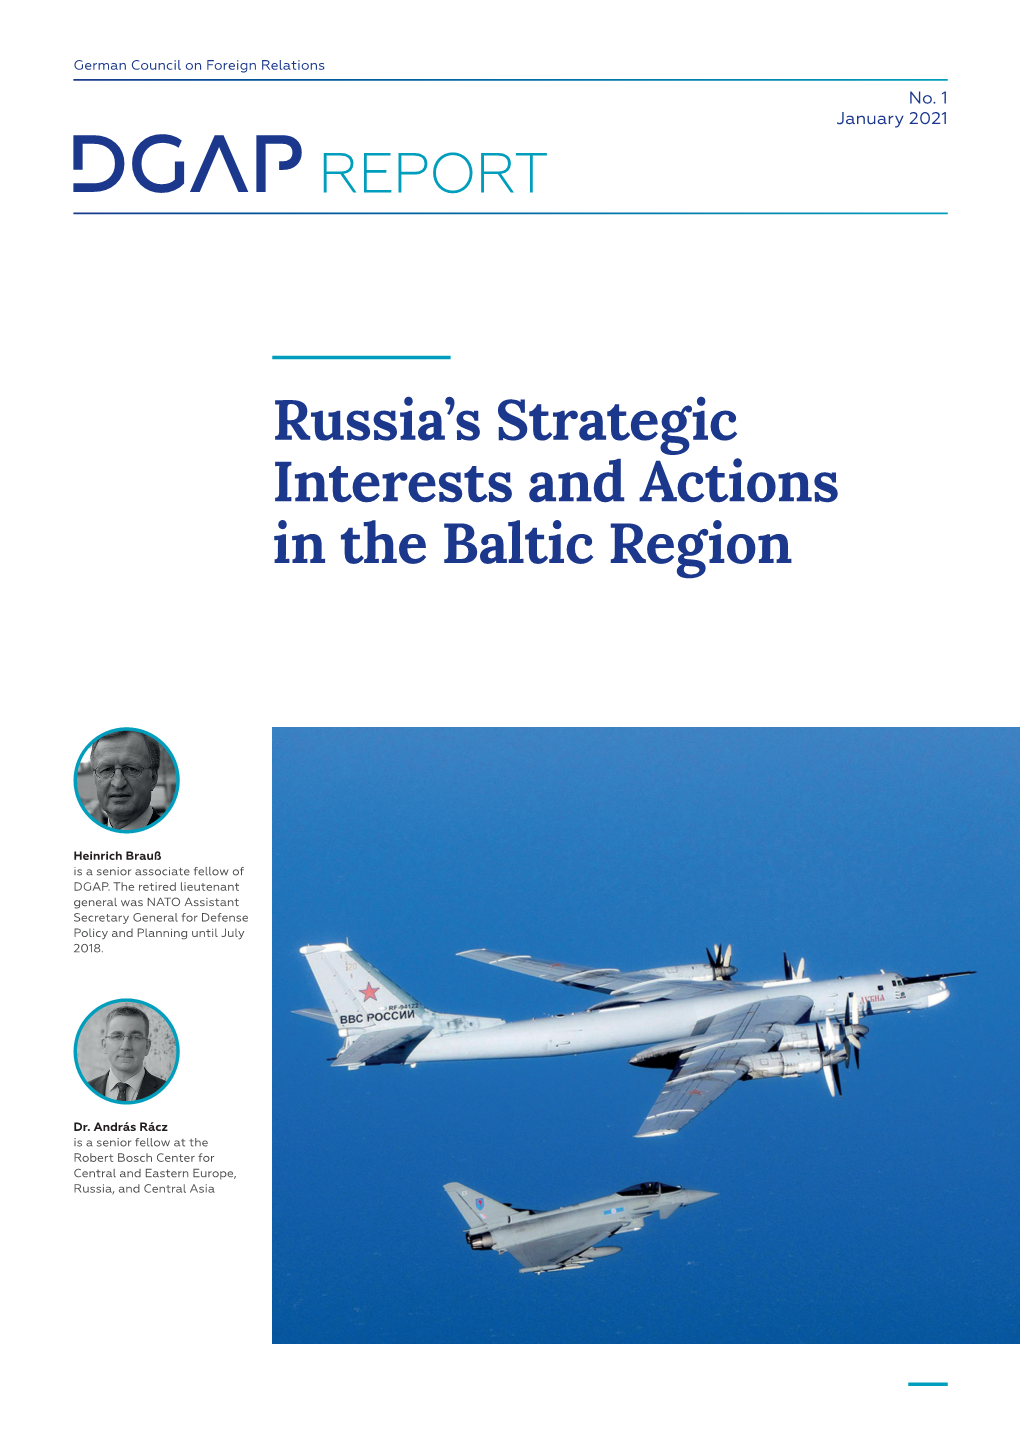 Russia's Strategic Interests and Actions in the Baltic Region